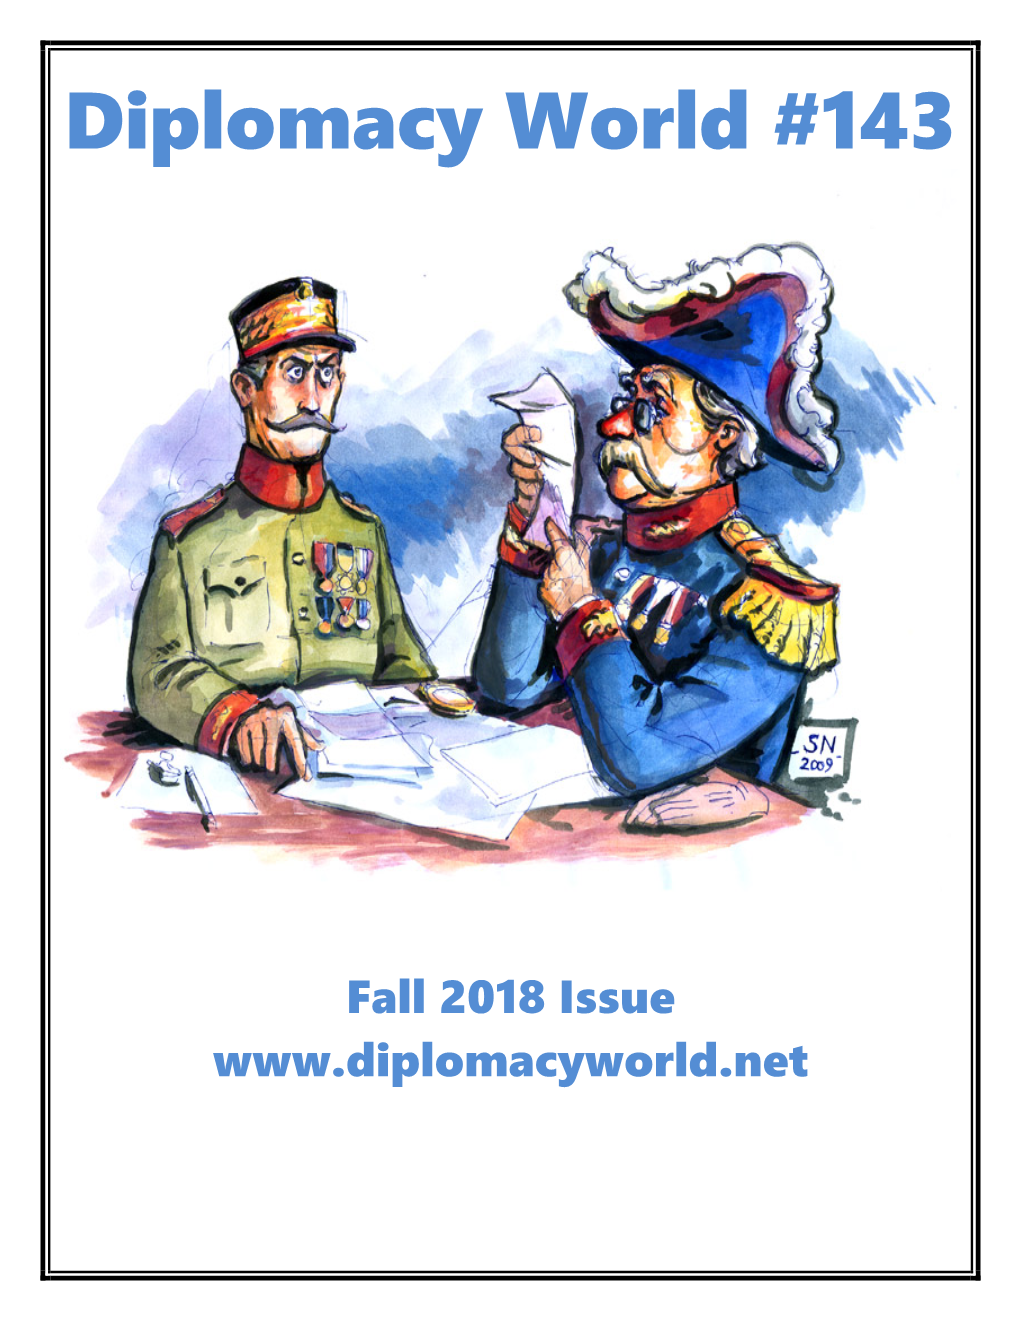 Diplomacy World #143, Fall 2018 Issue